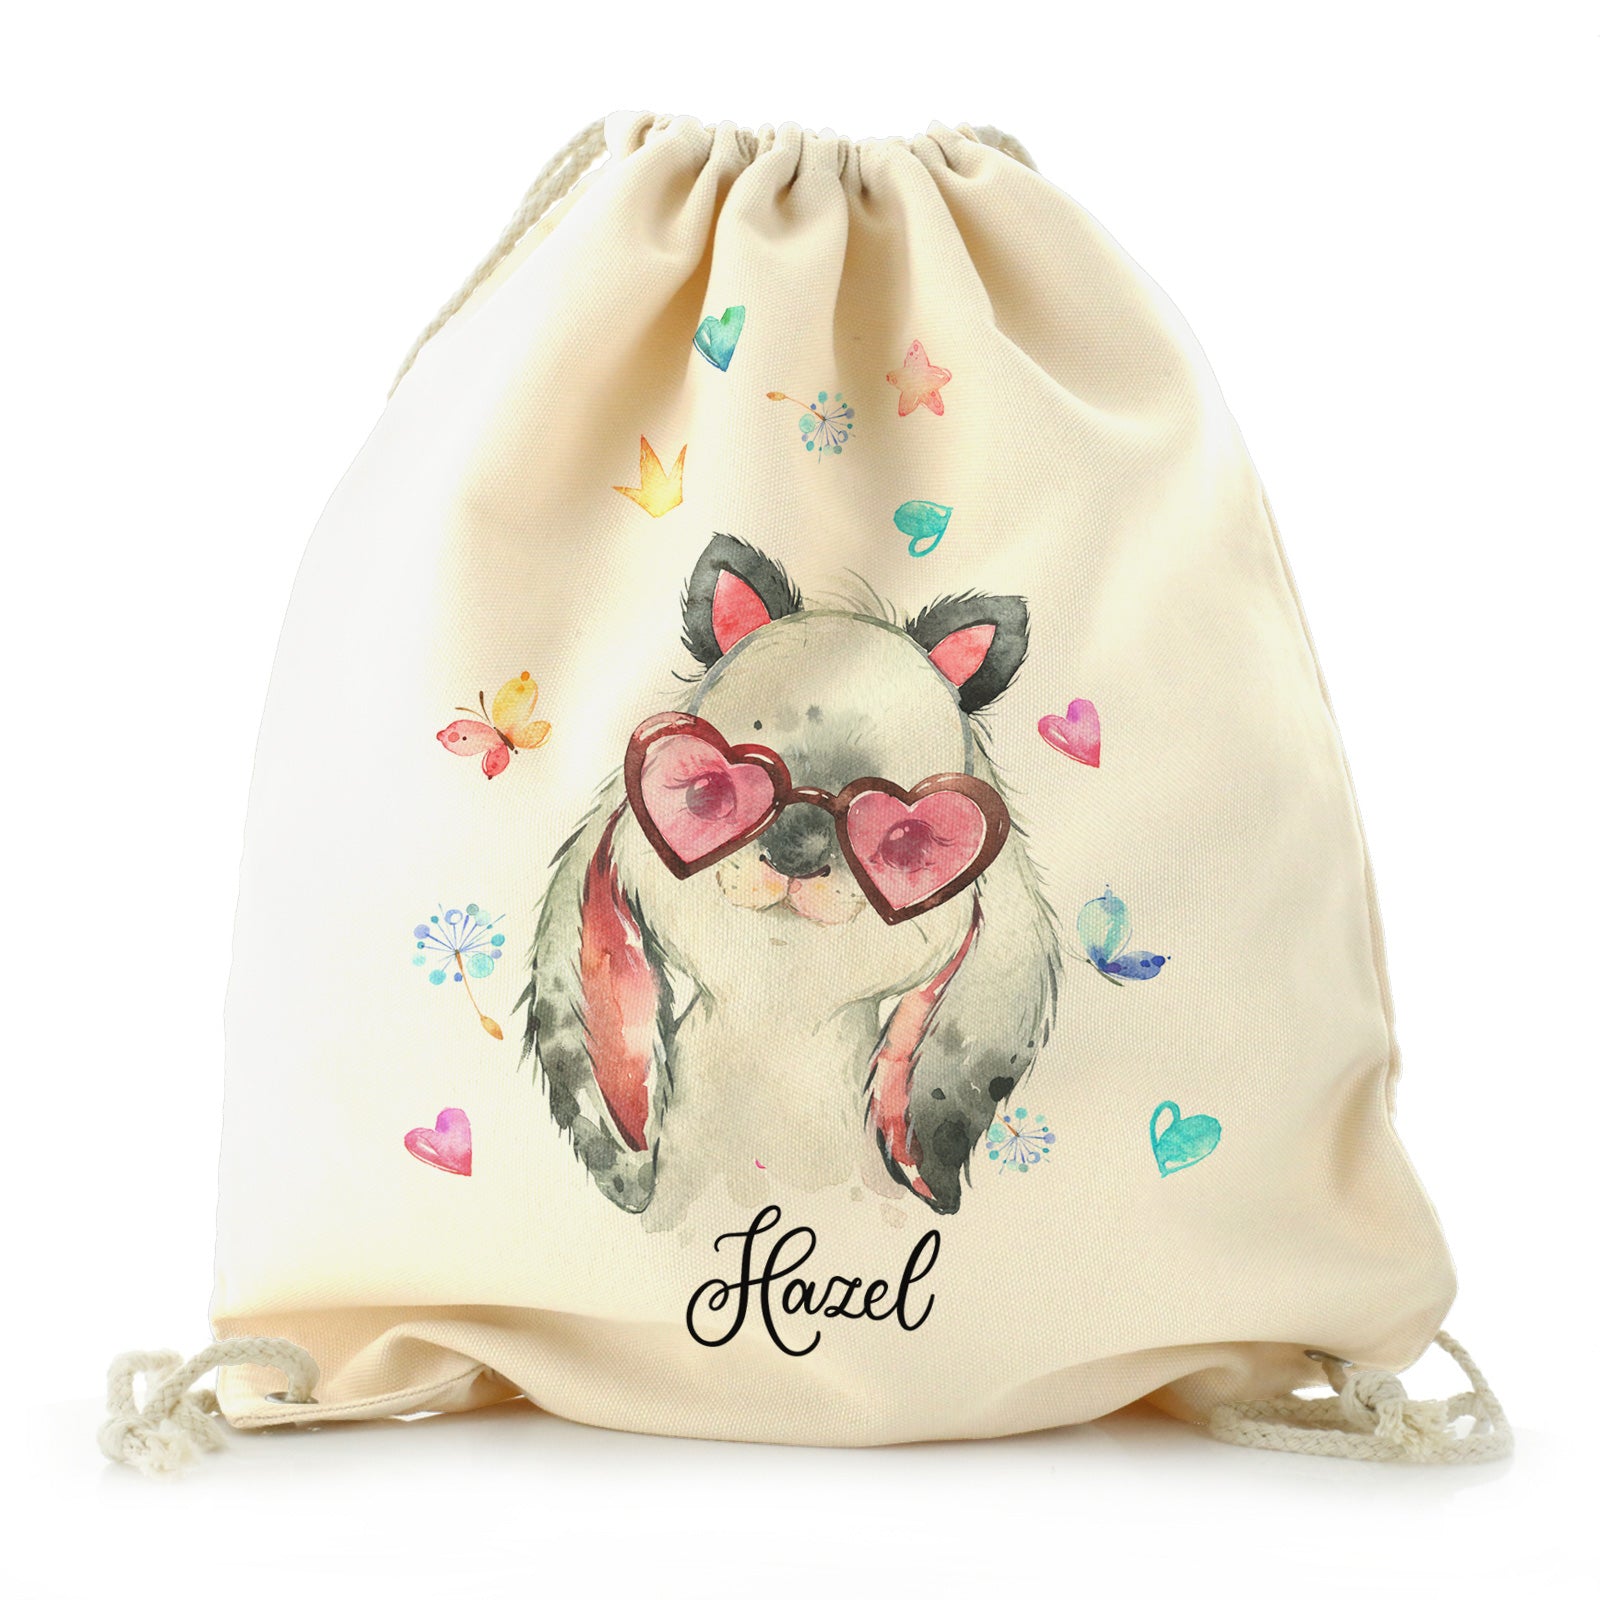 Personalised Canvas Drawstring Backpack with Grey Rabbit with Cat ears and Pink Heart Glasses and Cute Text